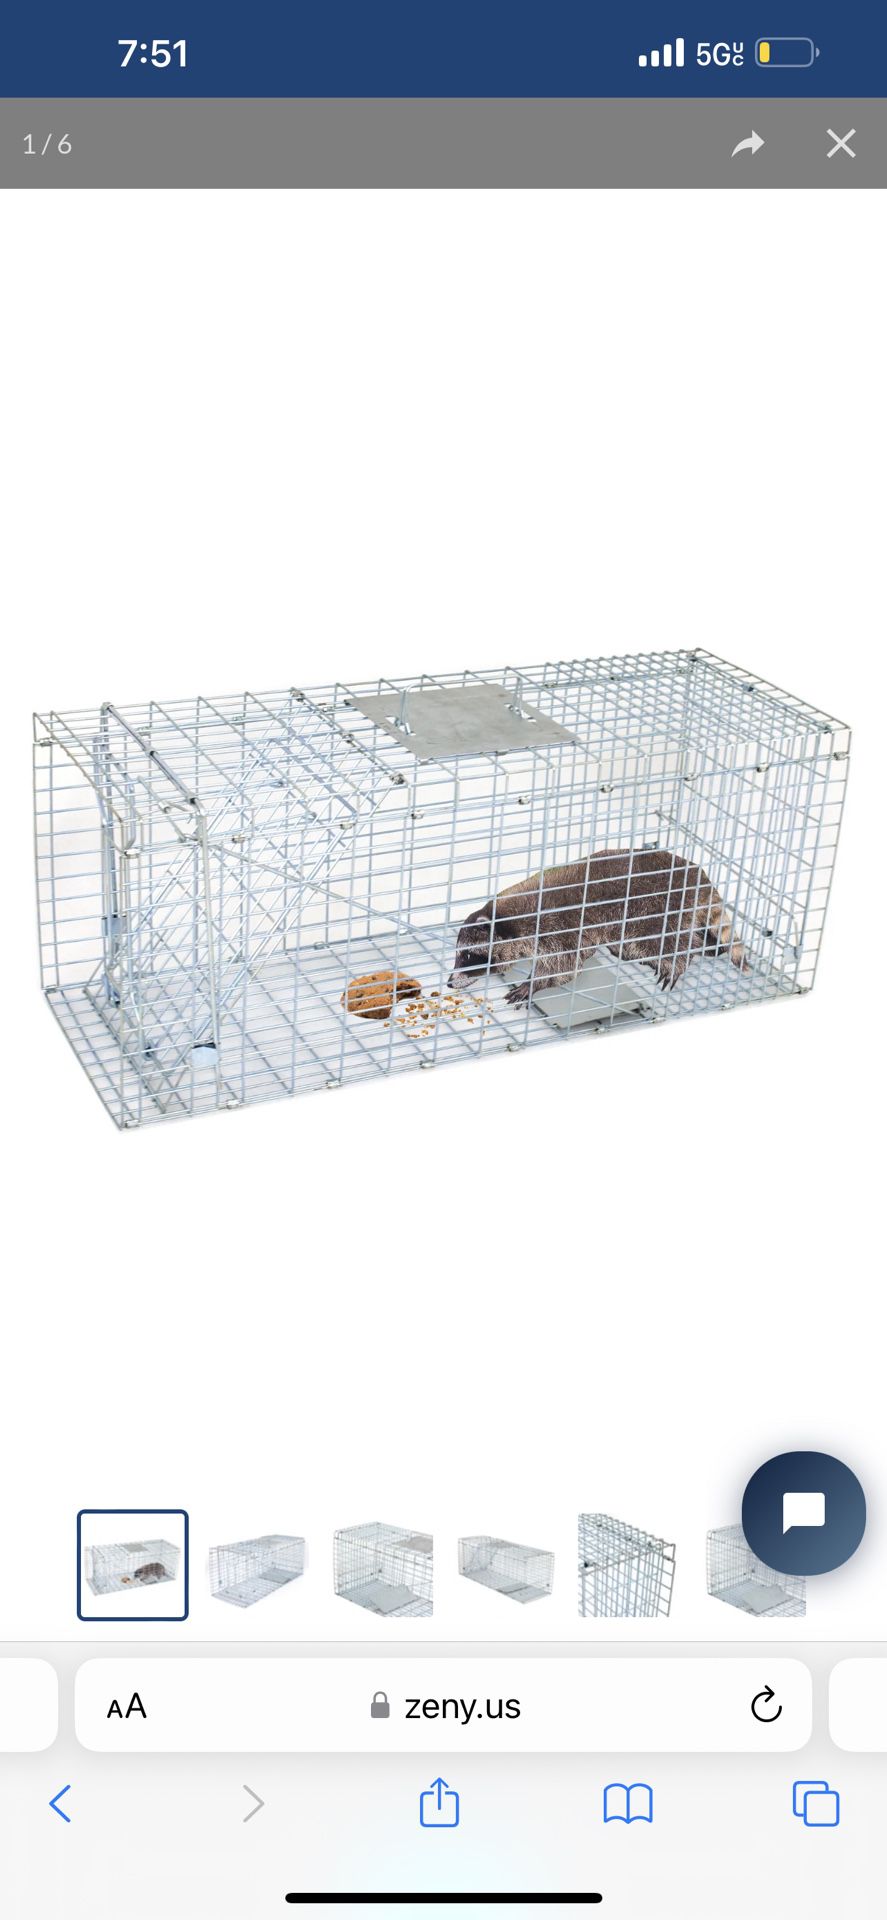 Live Animal Cage Trap 24"/31" Steel Cage Catch Release Humane Rodent Cage